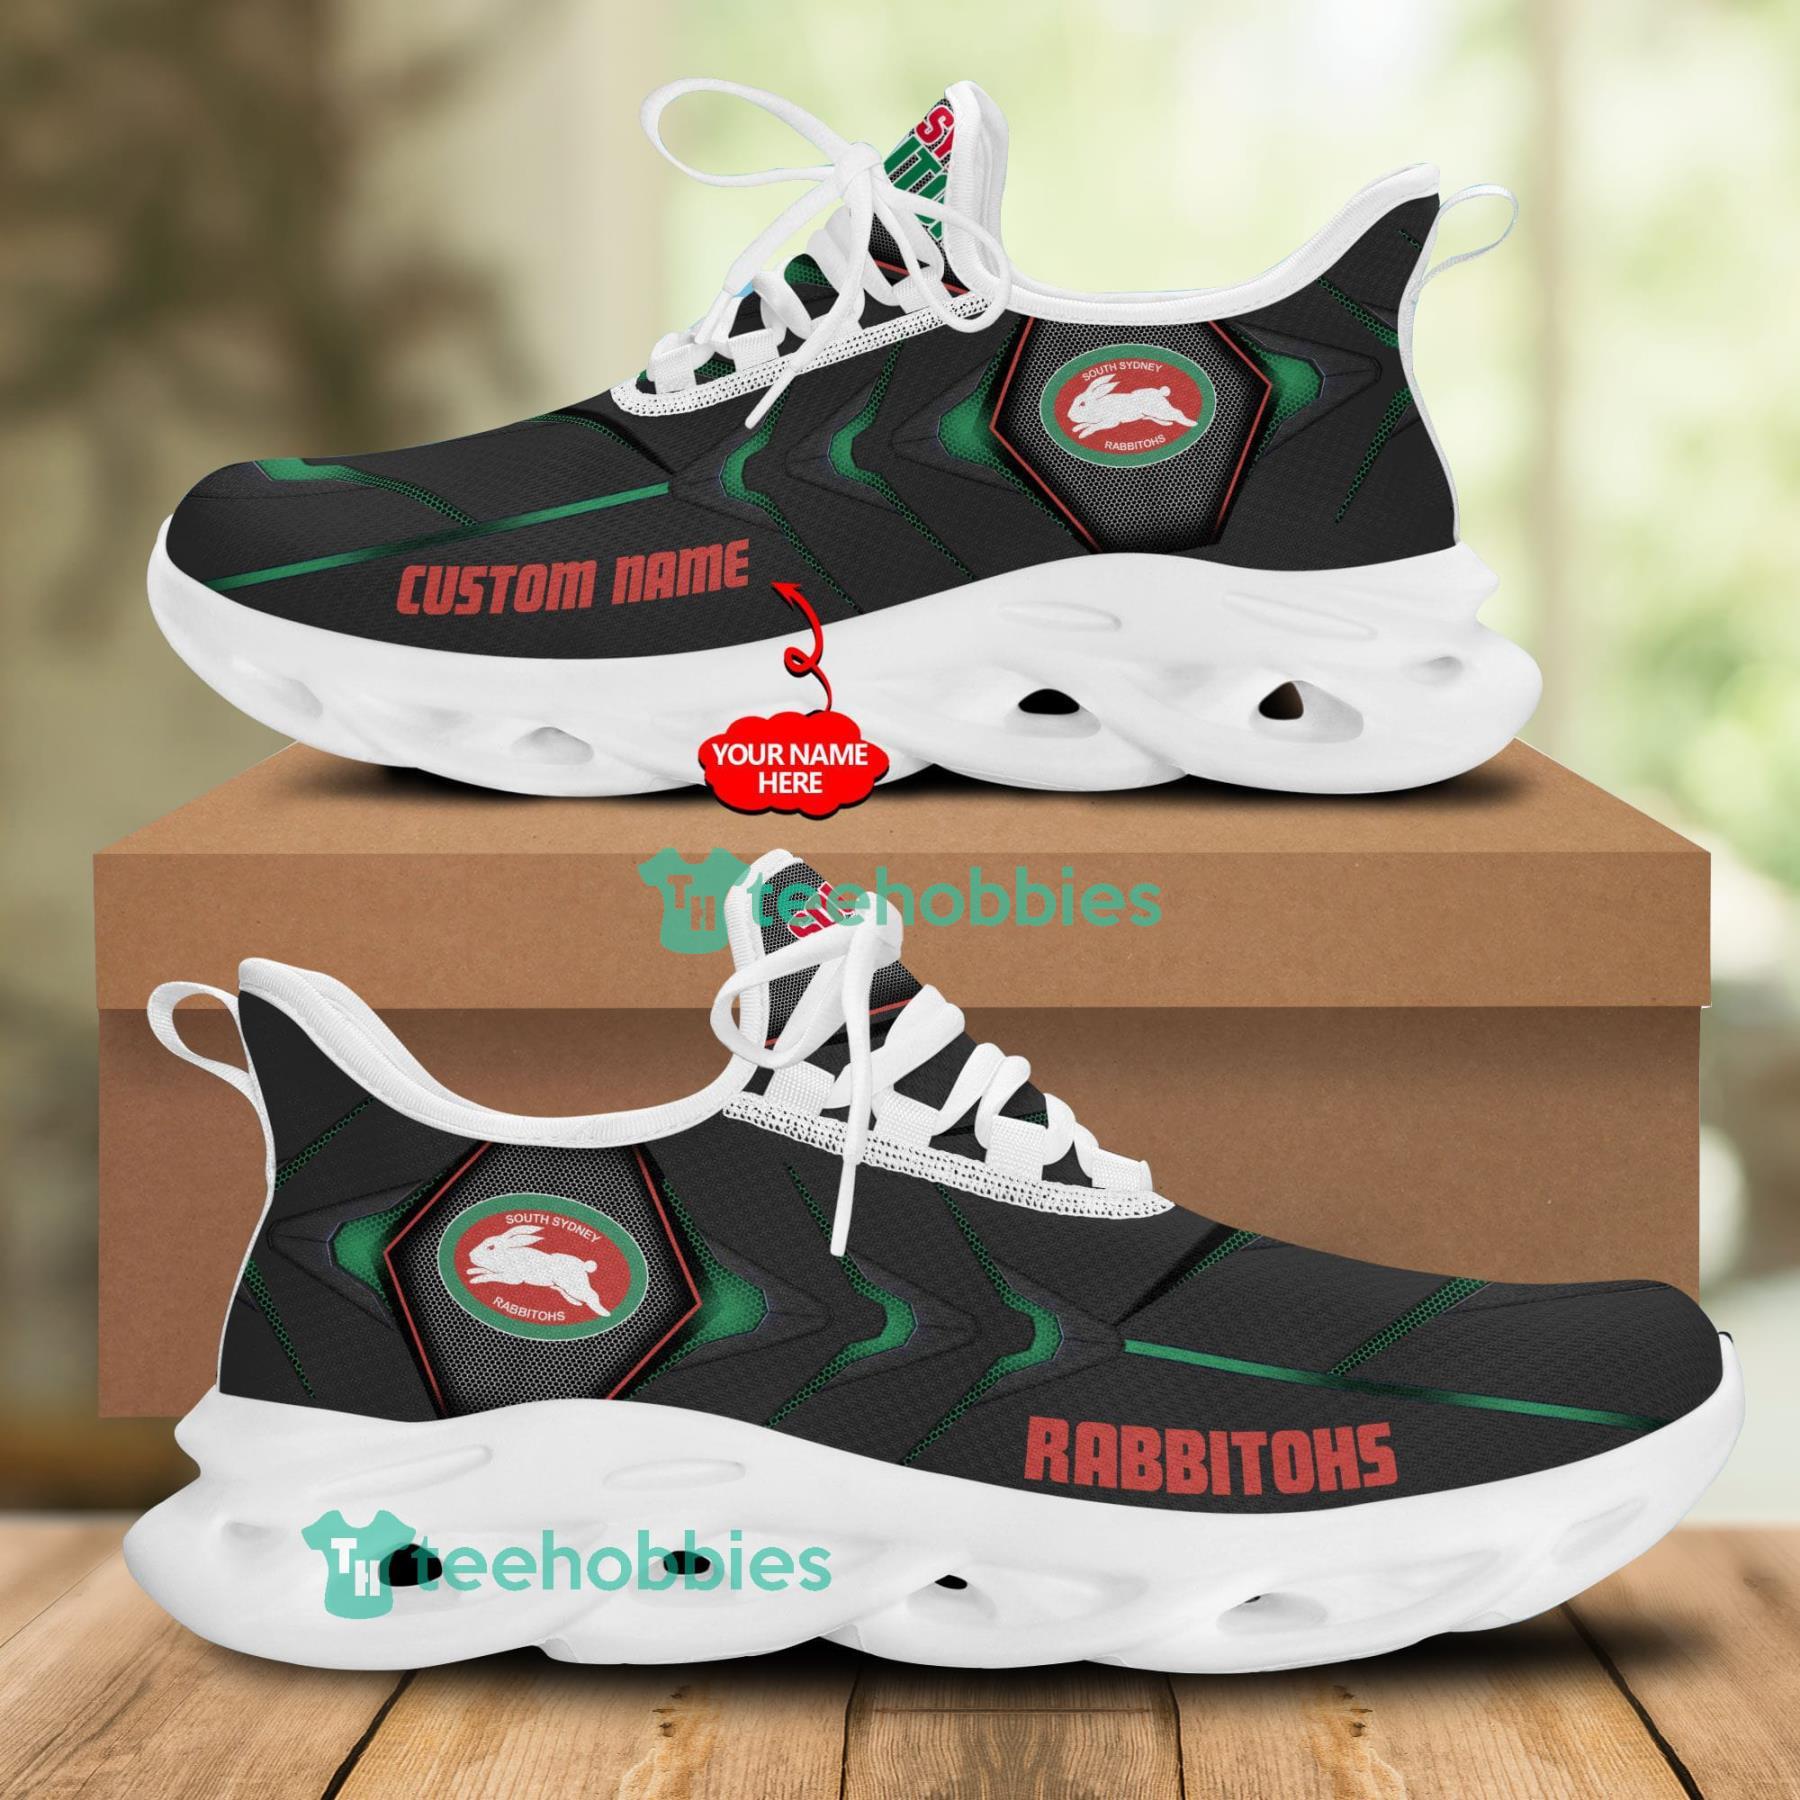 South Sydney Rabbitohs NRL Custom Name Sneakers Max Soul Shoes For Men And Women Product Photo 1